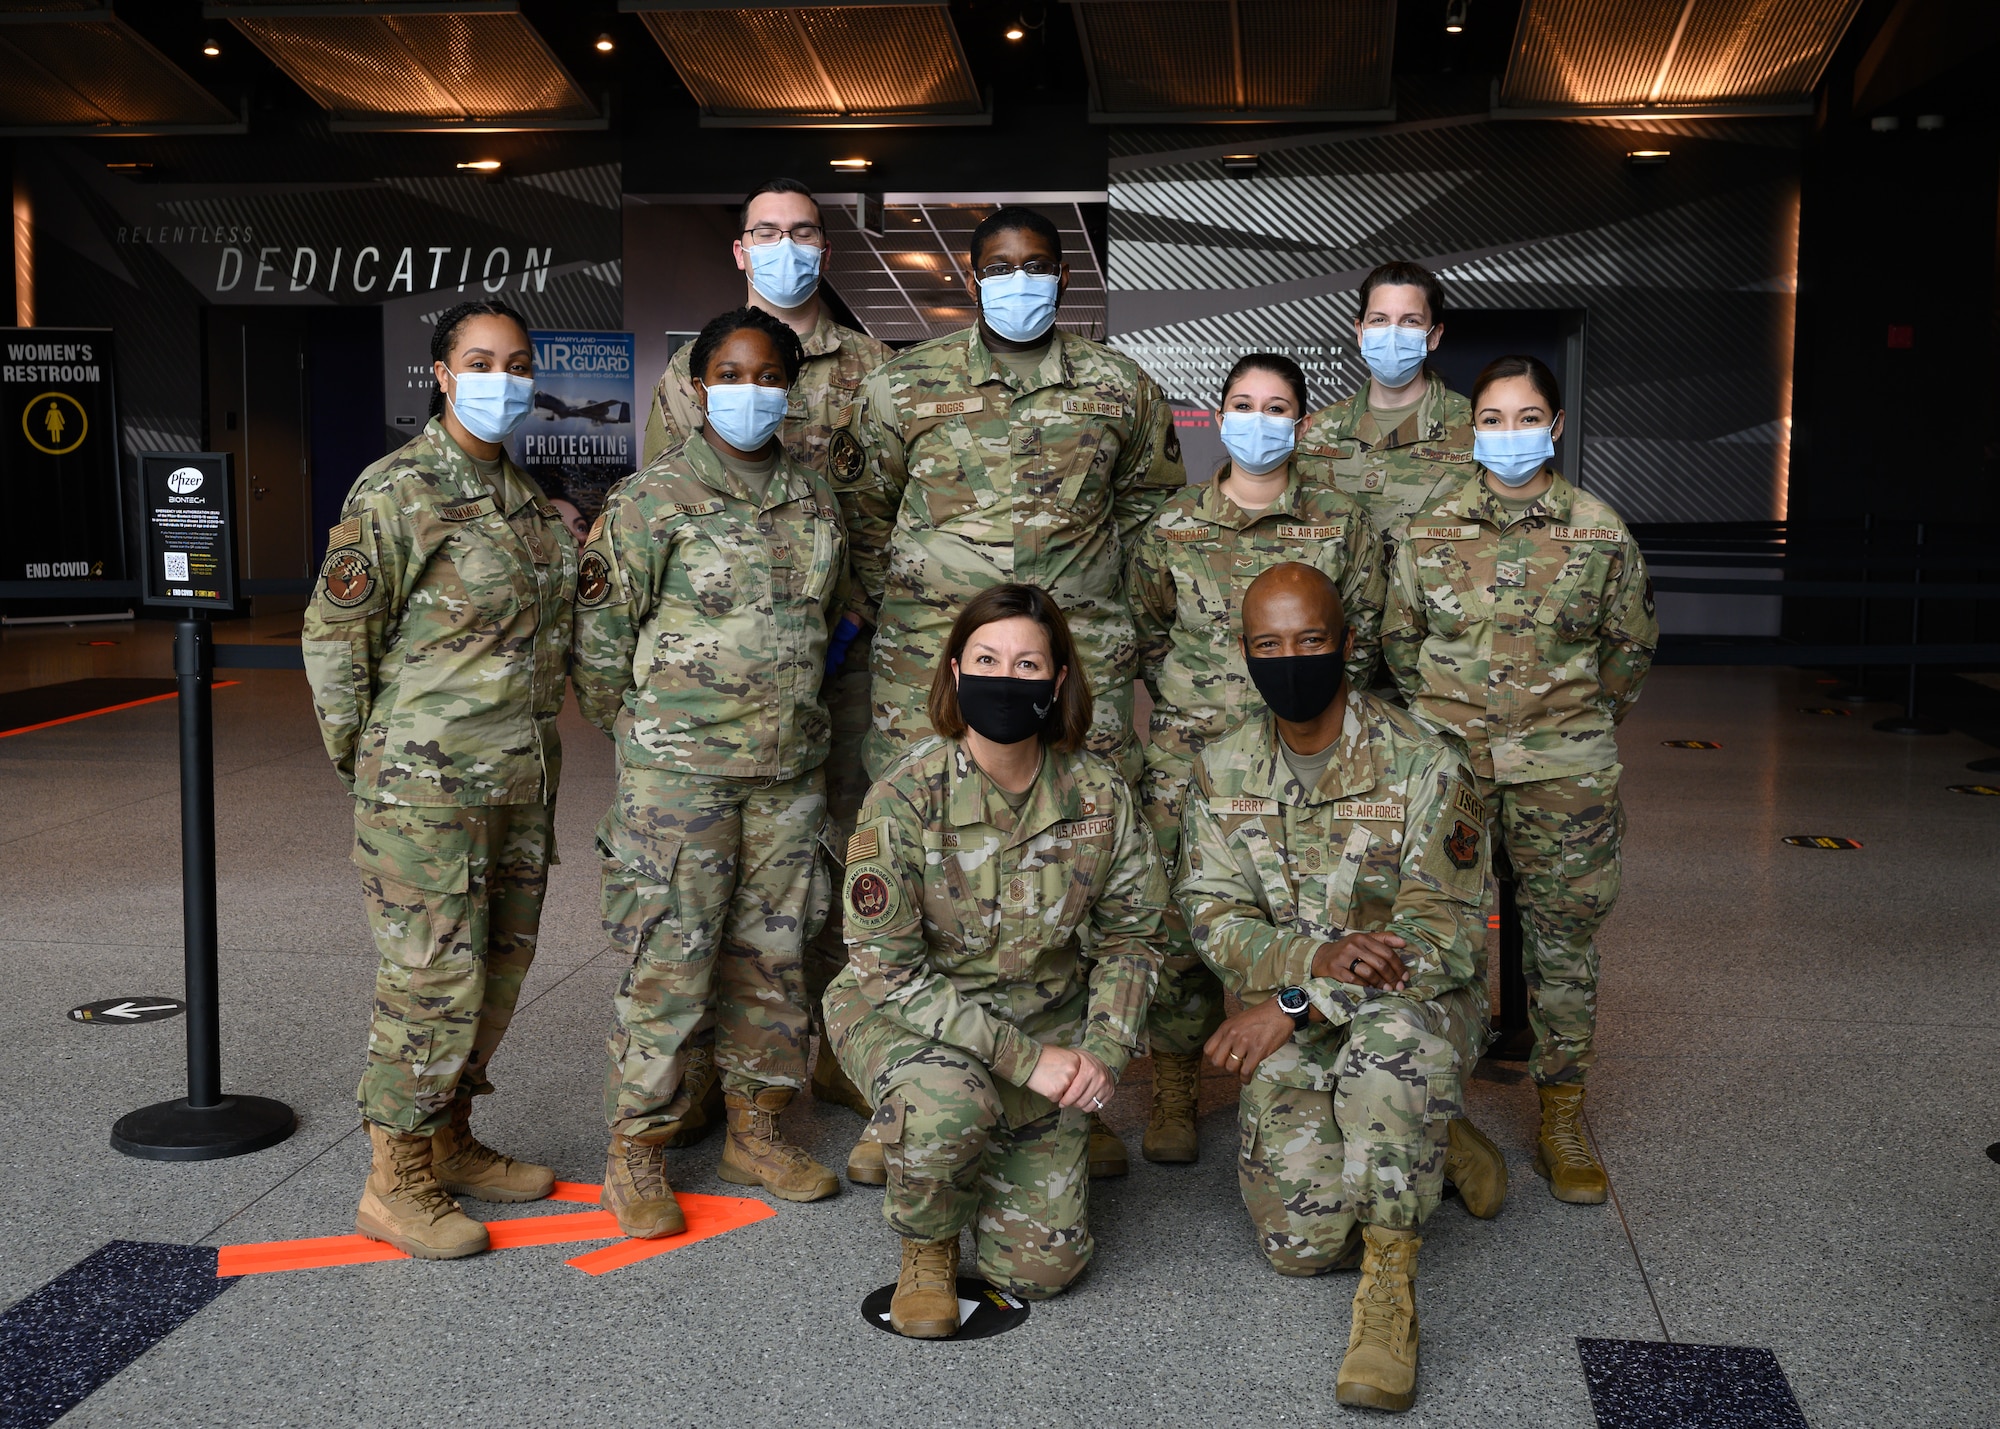 Chief Master Sgt. of the Air Force JoAnne S. Bass poses for a group portrait with Airmen assigned to the 175th Wing, Maryland National Guard, at the mass vaccination site at M&T Bank Stadium, Baltimore, on May 3, 2021.